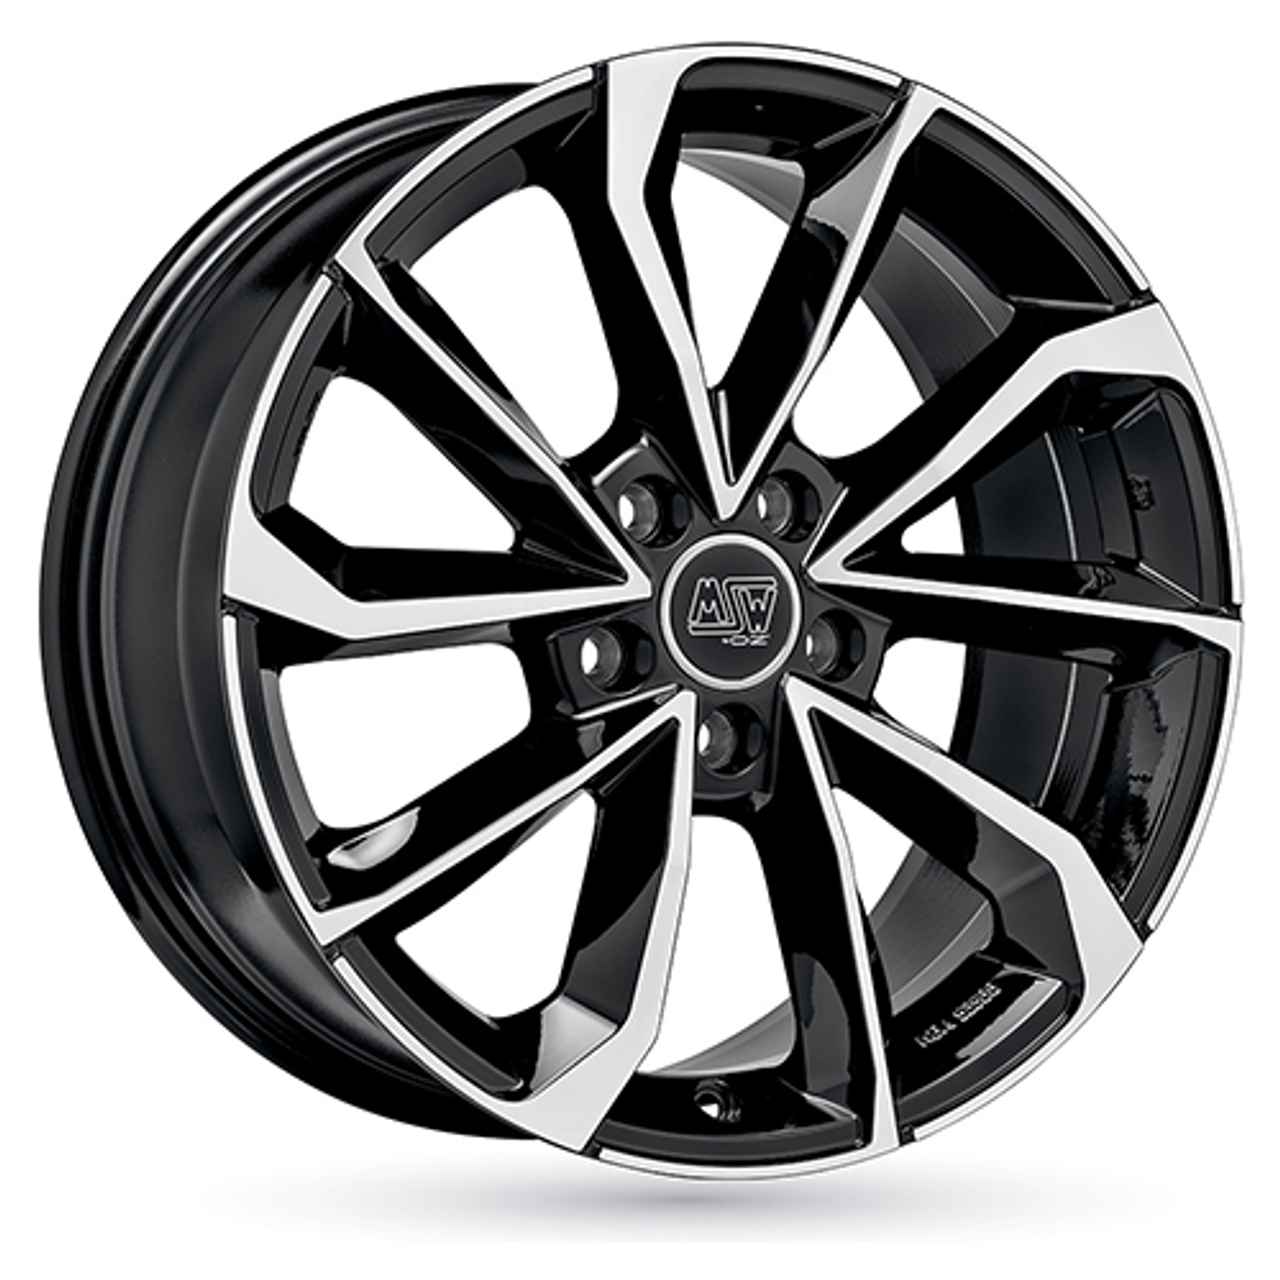 MSW (OZ) MSW 42 gloss black full polished 7.5Jx17 5x120 ET50